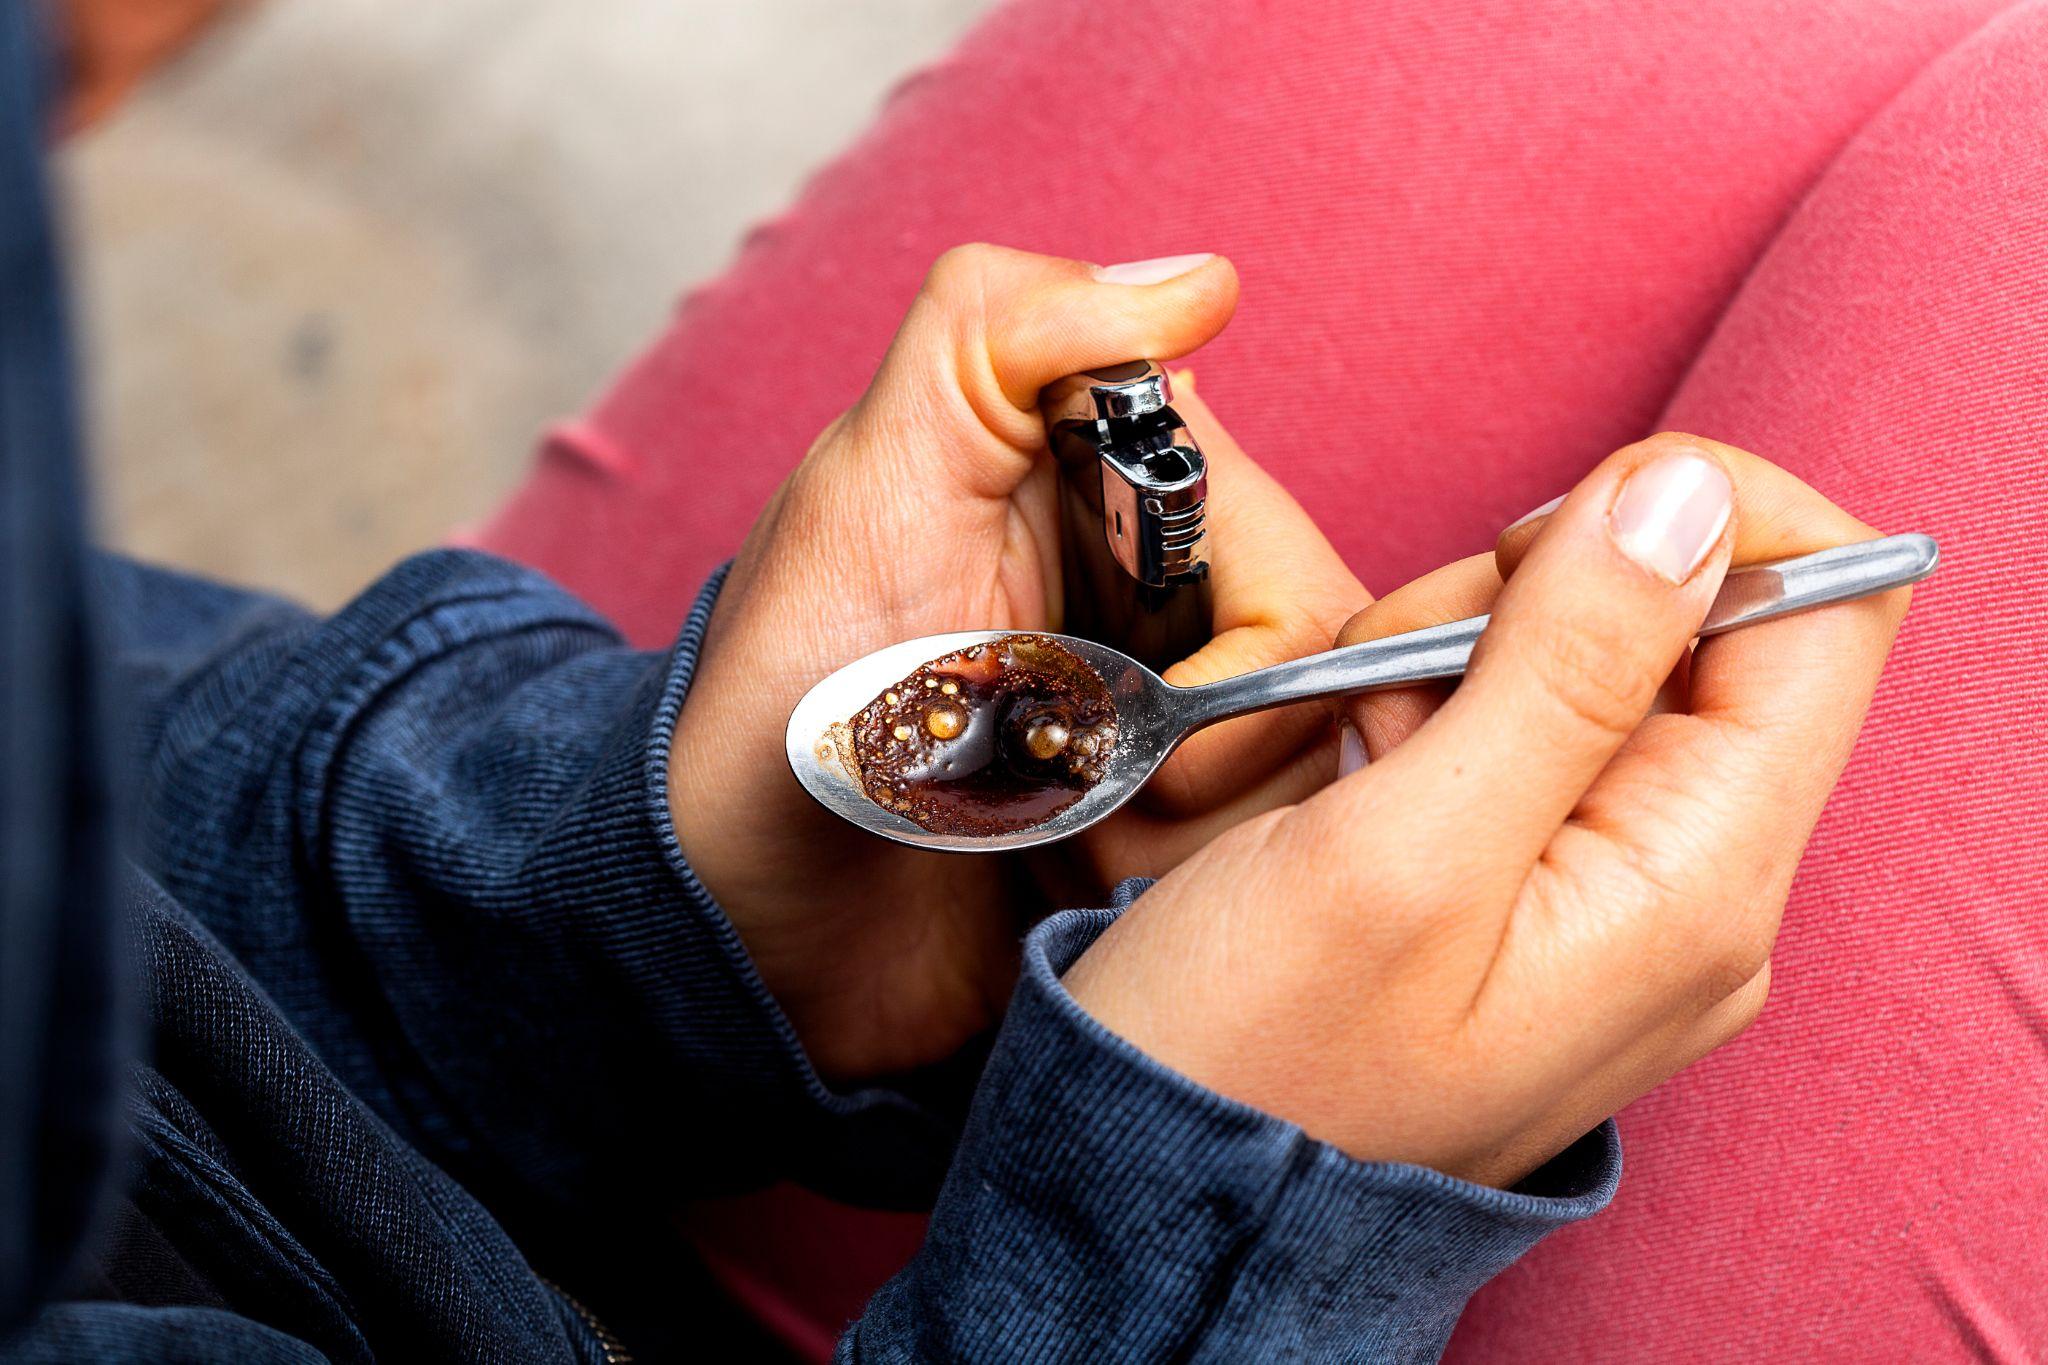 Young woman with a lighter and a spoon preparing a dose of heroin